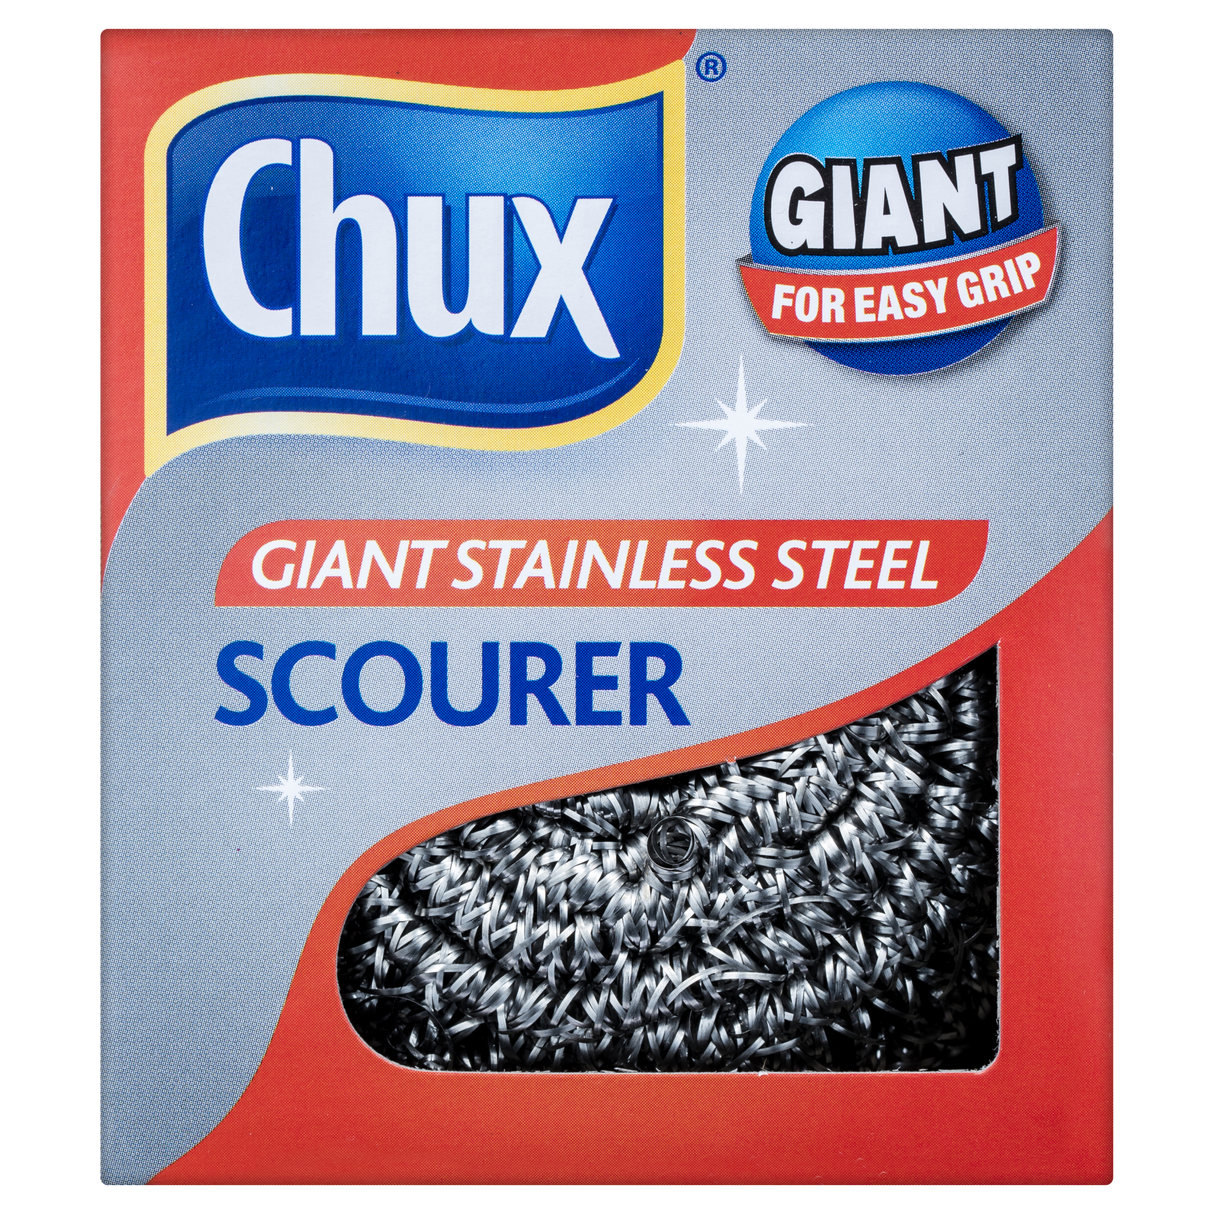 Chux Giant Stainless Steel Scourer 1 Pack